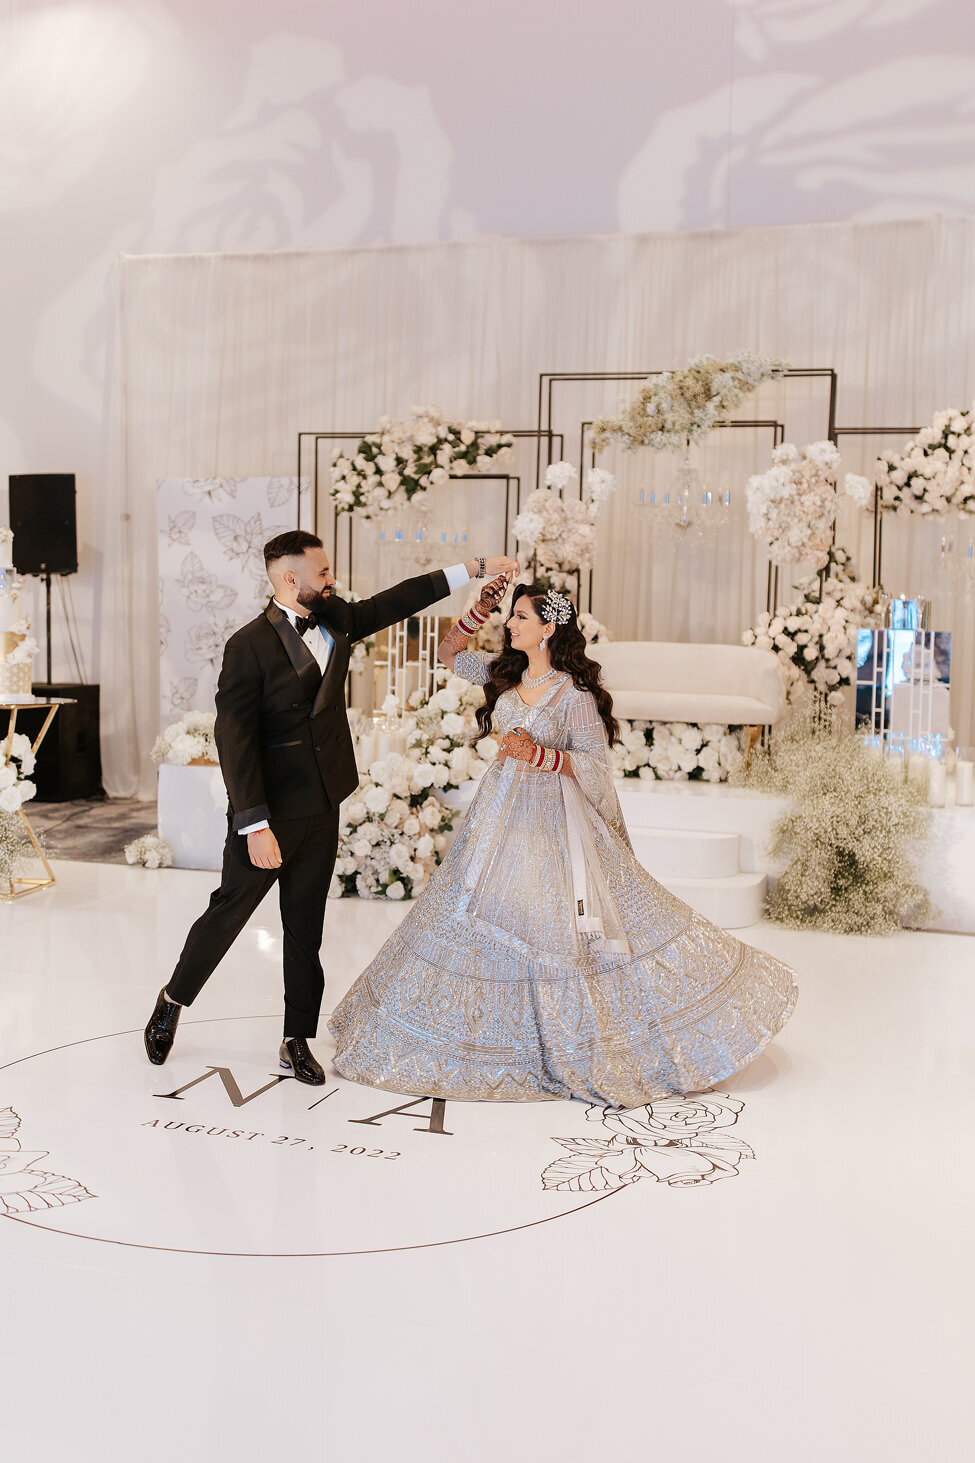 Bride and groom dancing at luxurious Indian wedding.